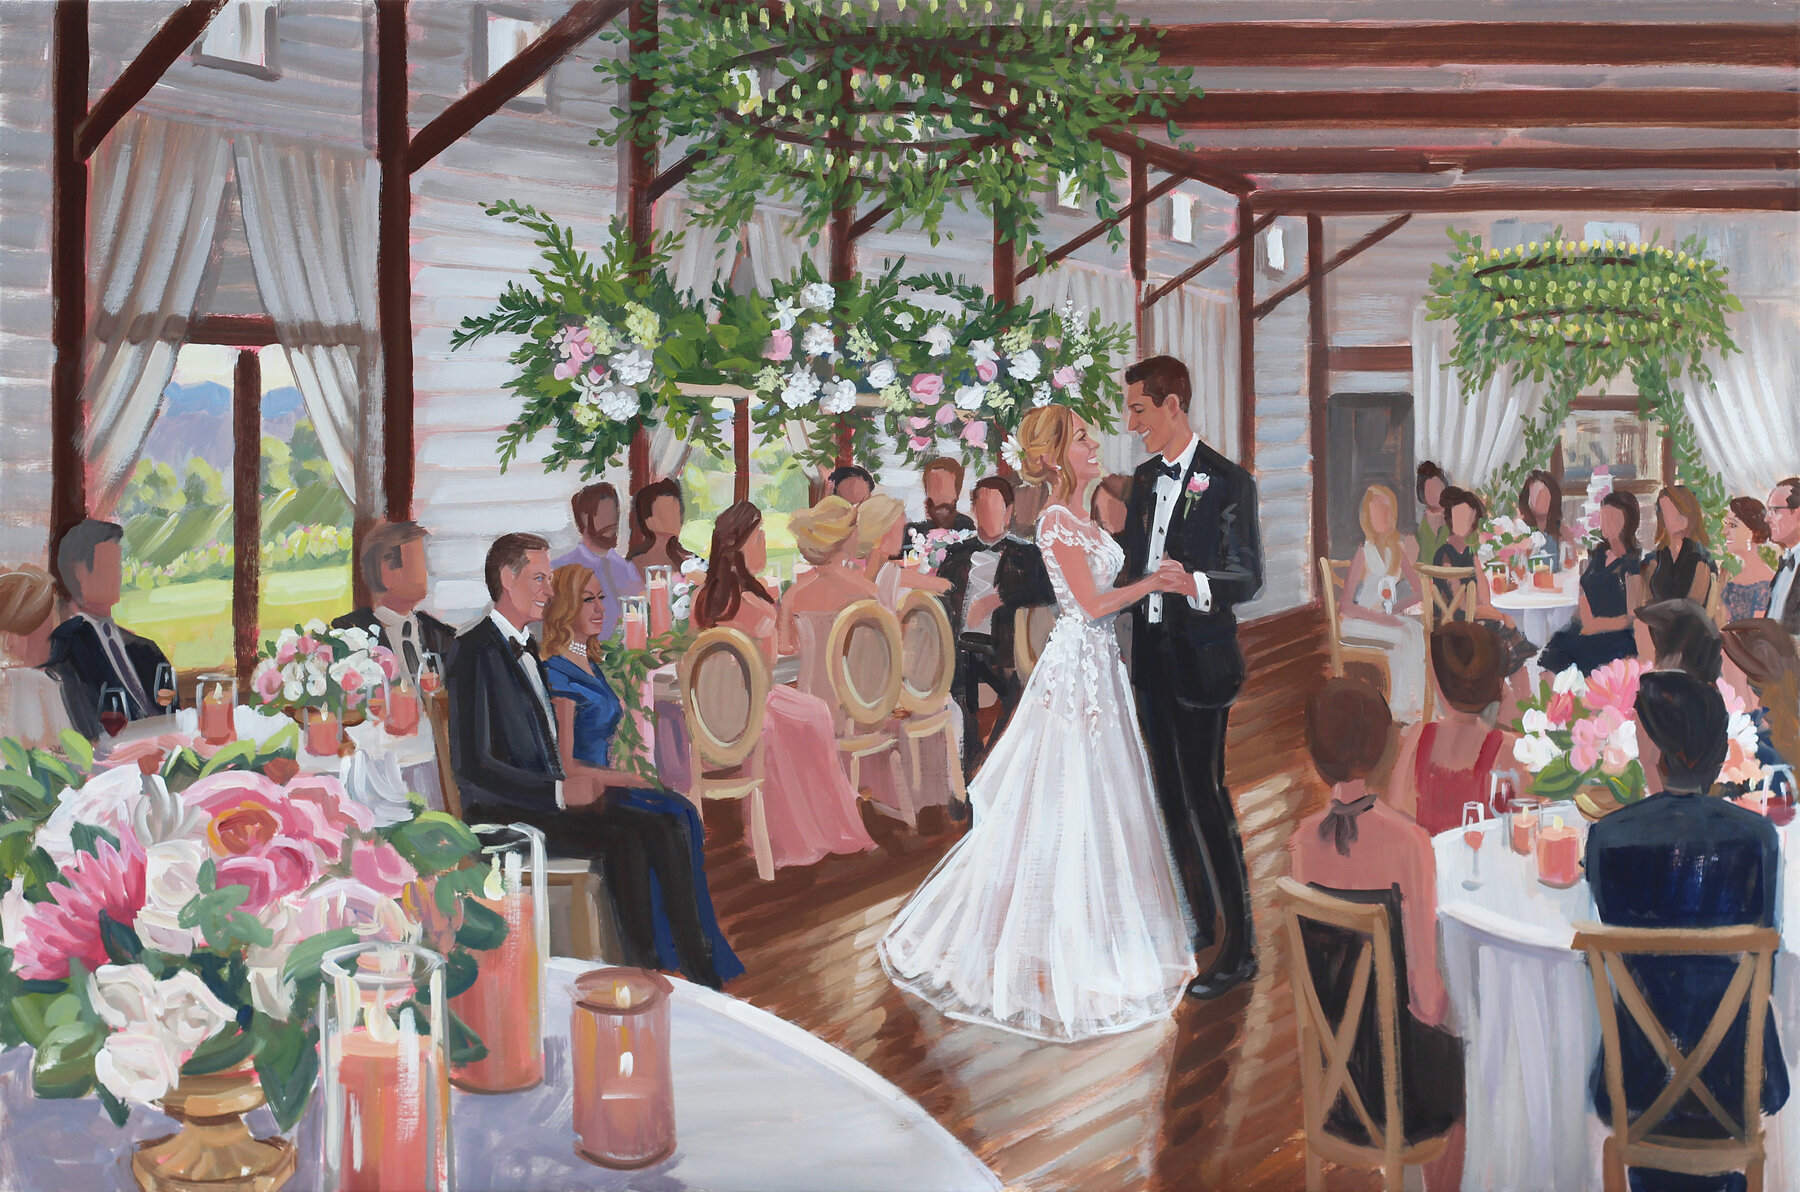 Live Wedding Painter, Ben Keys,  captured Stephanie + Michael’s first dance during their reception held at Charlottesville’s gorgeous Pippin Hill Farm & Vineyards.